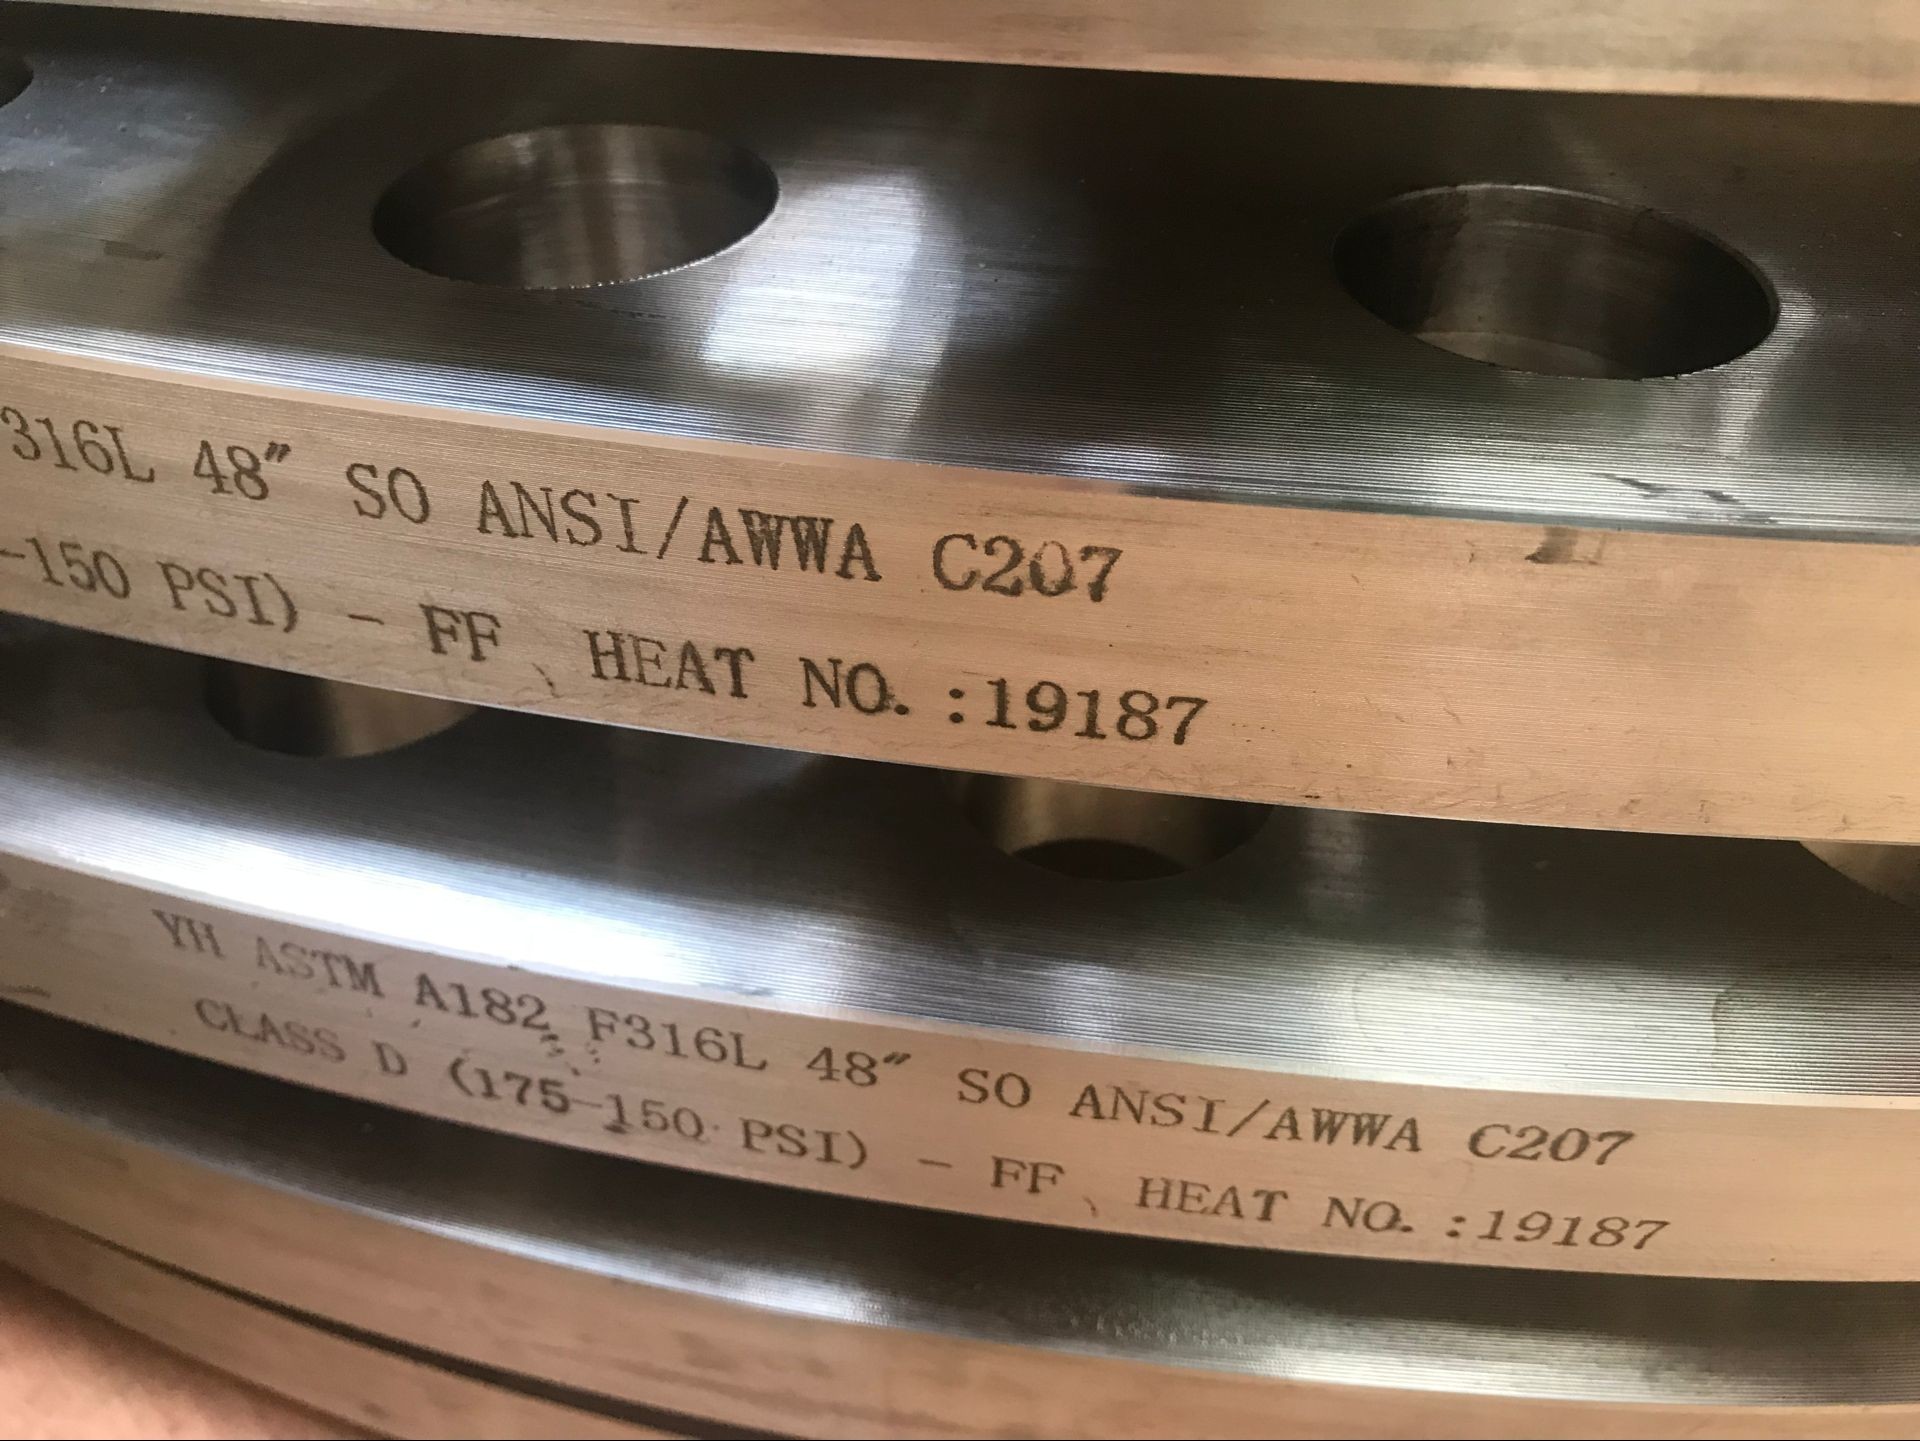 Soff Ansiawwa C207 Class D Flange Steel Flanges Asme Astm Bs 175 150 Psi86psi Steelseamlesspipe 6338